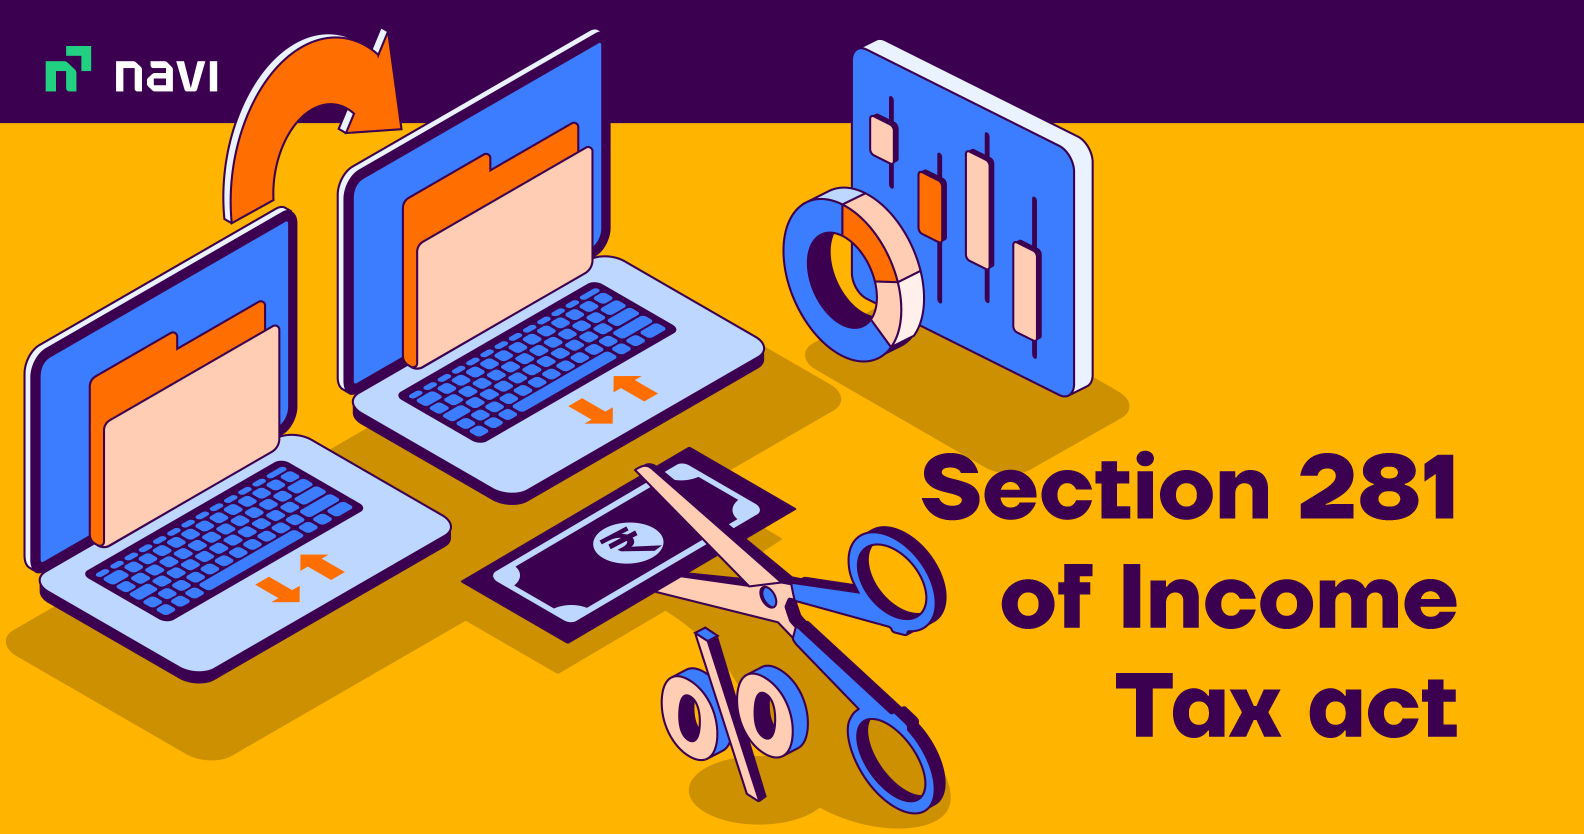 Section 10 of Income Tax Act - Deductions and Allowances